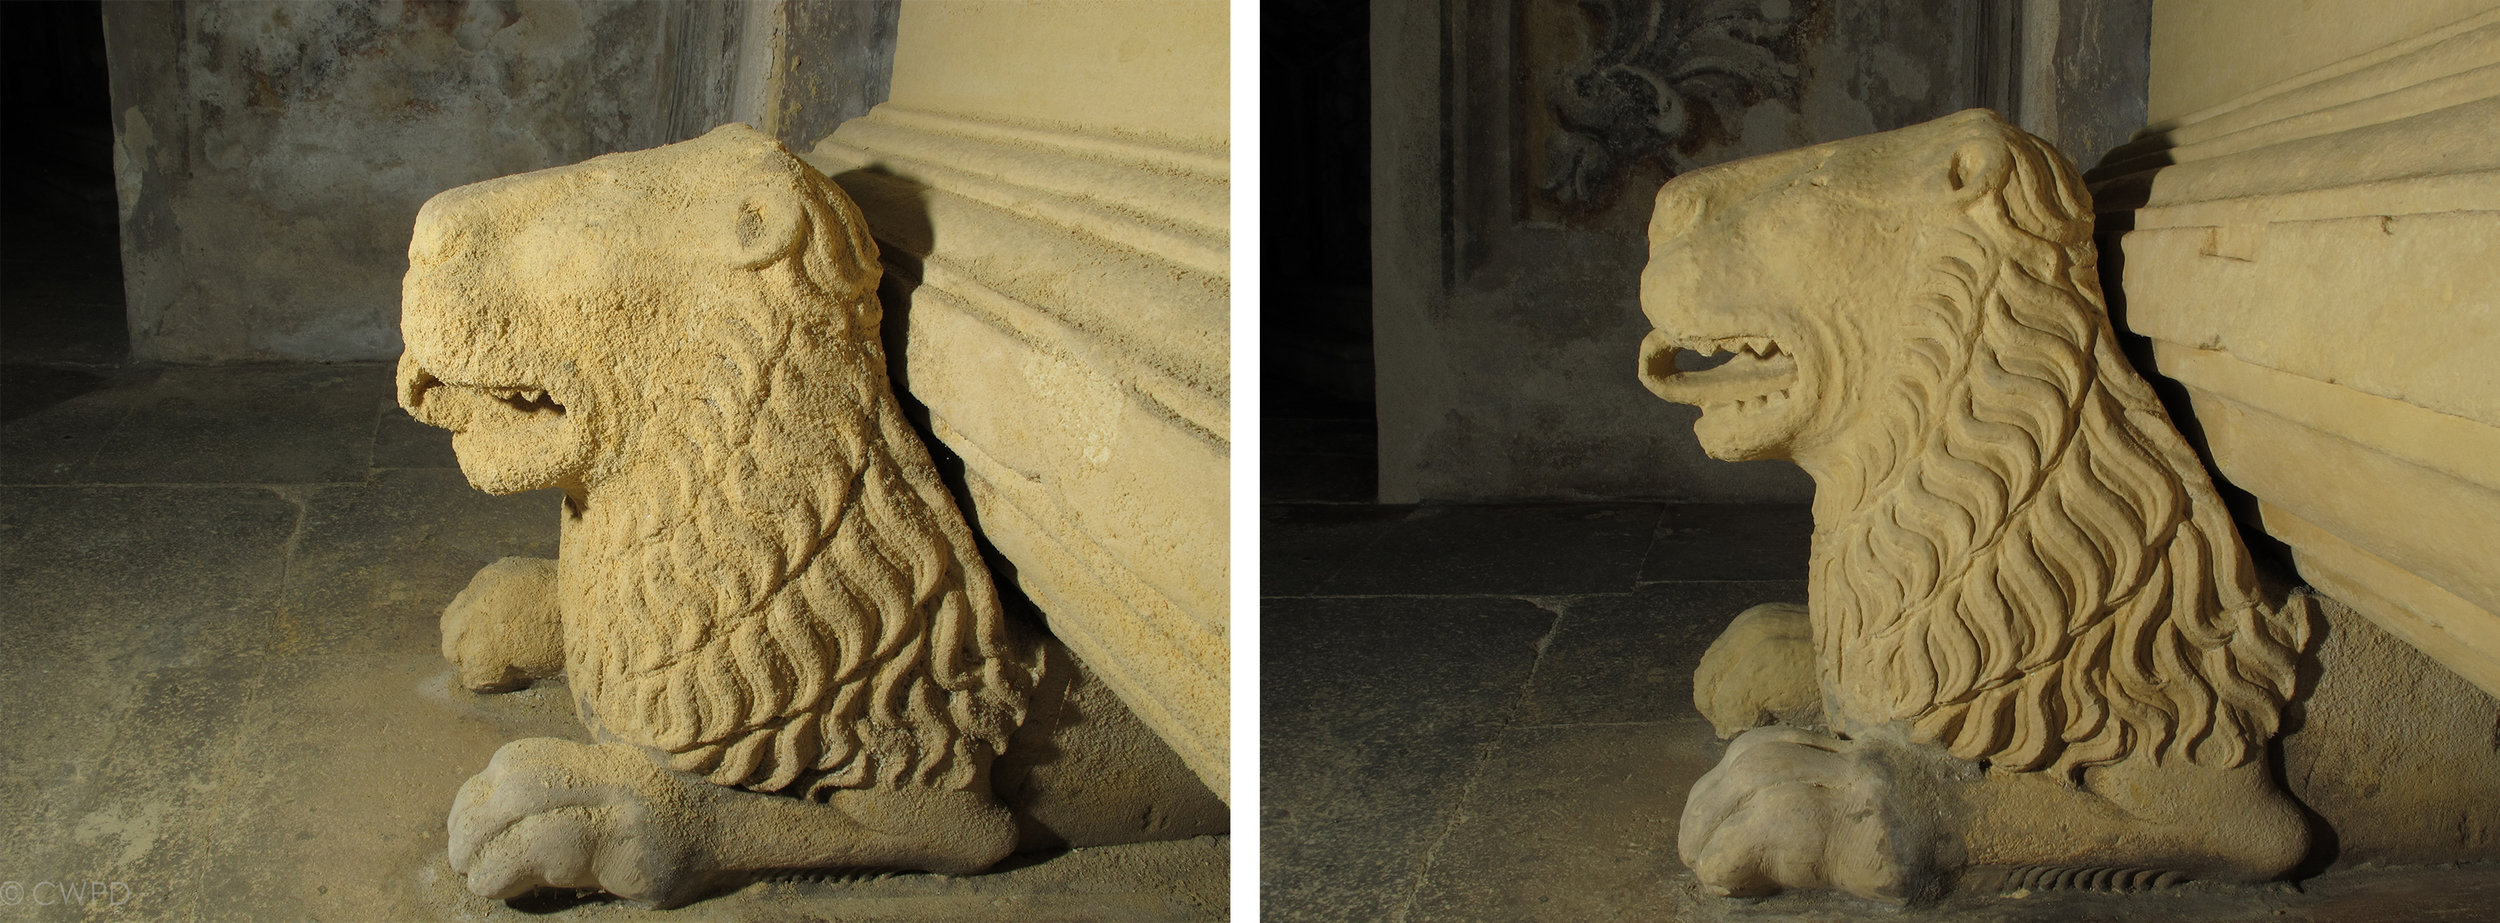  Detail of the limestone tomb monuments before (left) and after (right) consolidation and cleaning.&nbsp;  Image © Courtauld CWPD    